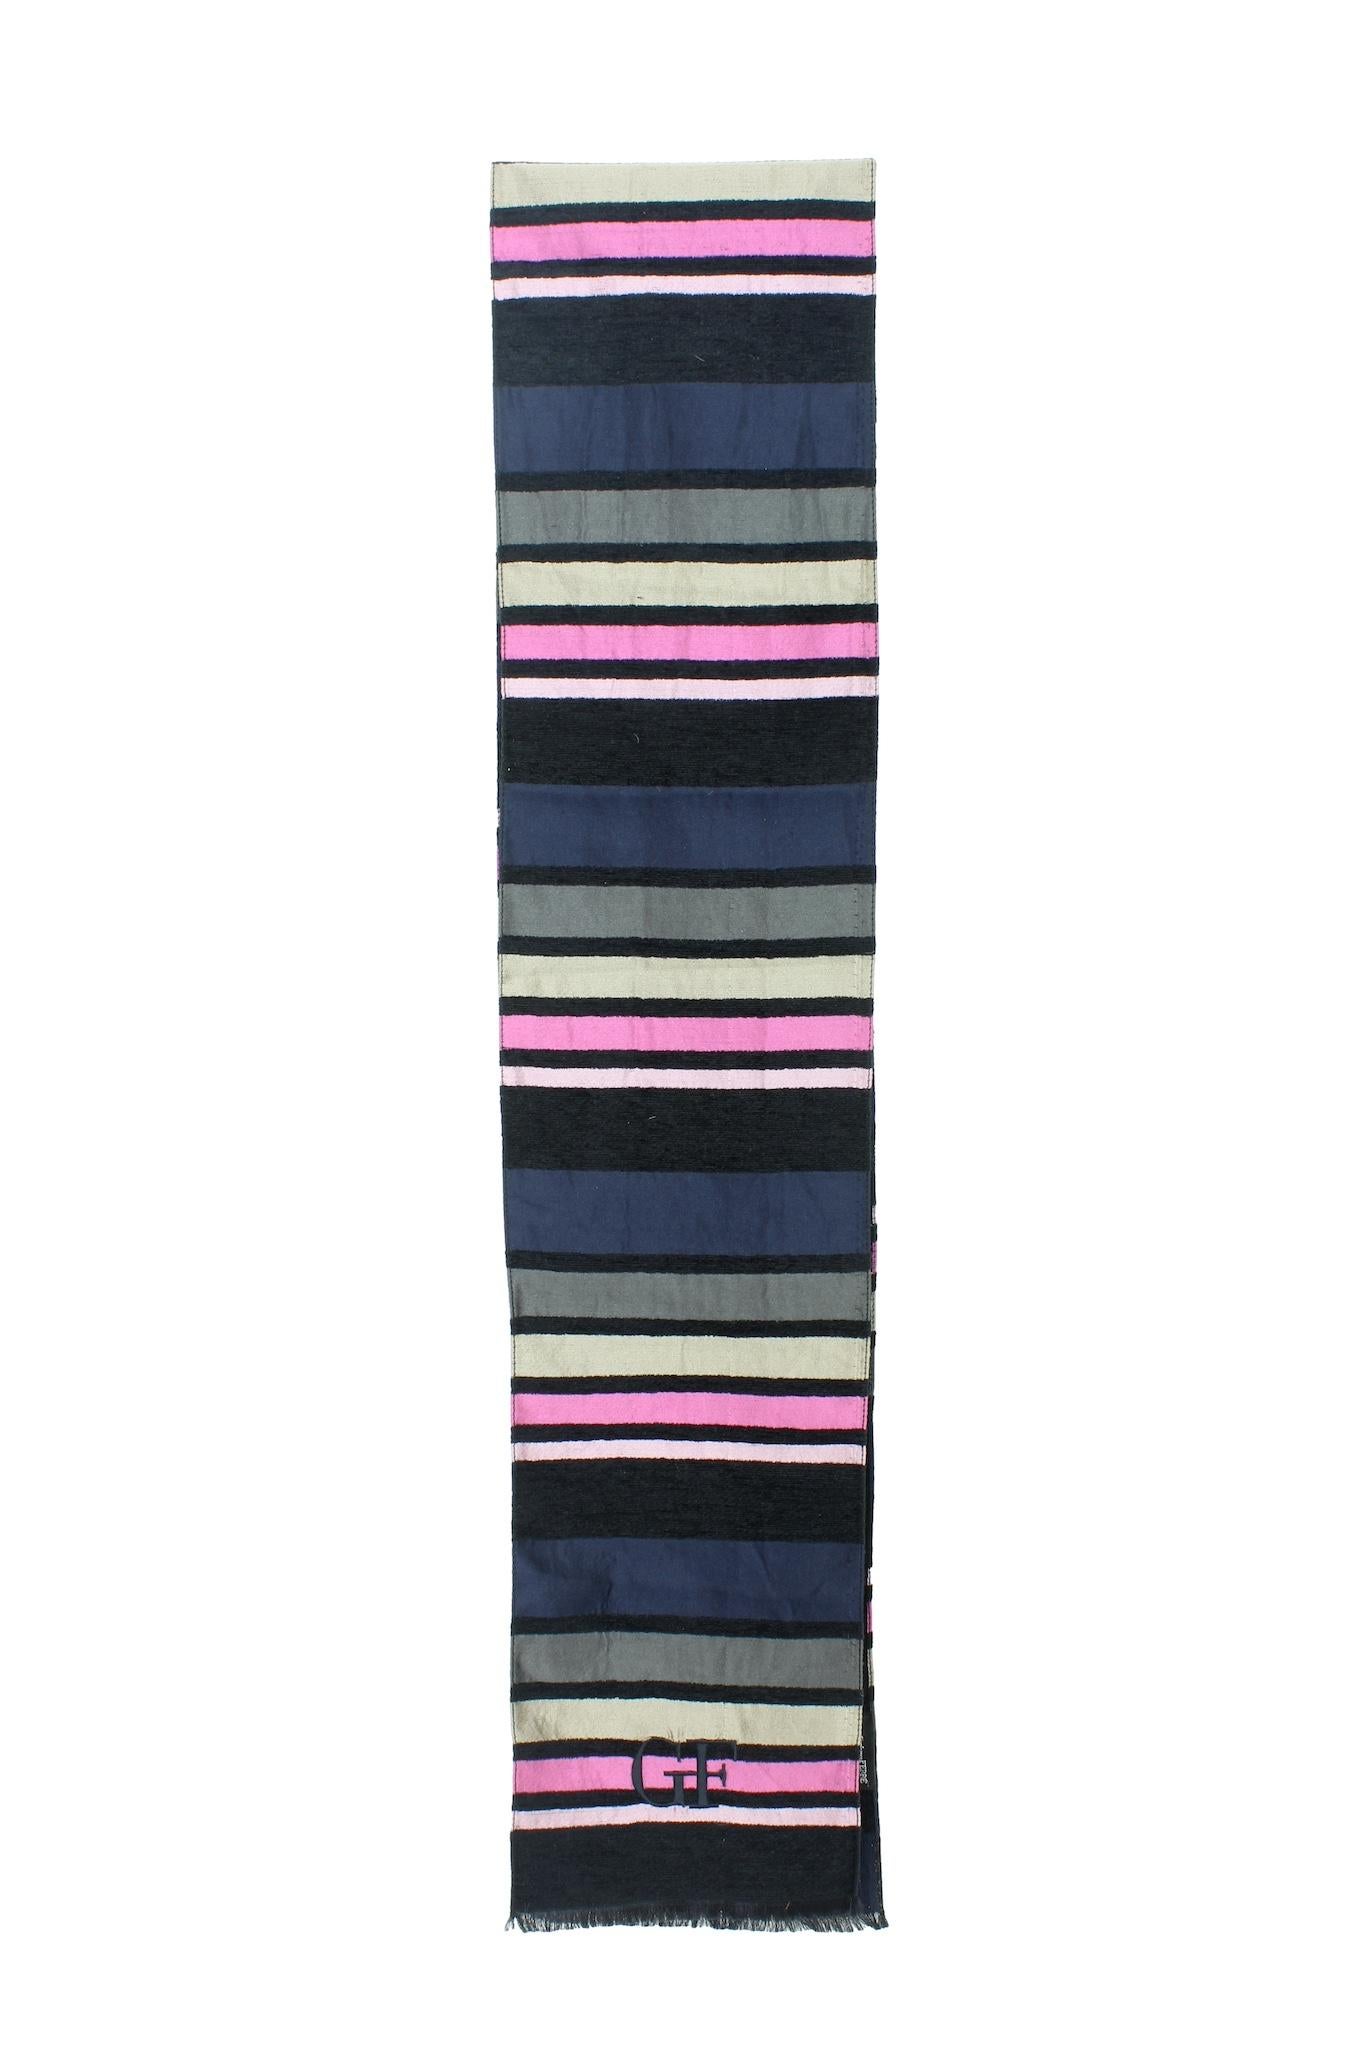 Gianfranco Ferrè women's scarf 2000s. Stole with striped pattern, black, pink and blue, 82% wool, 18% silk fabric. Made in italy.

Measures: 190 x 19 cm